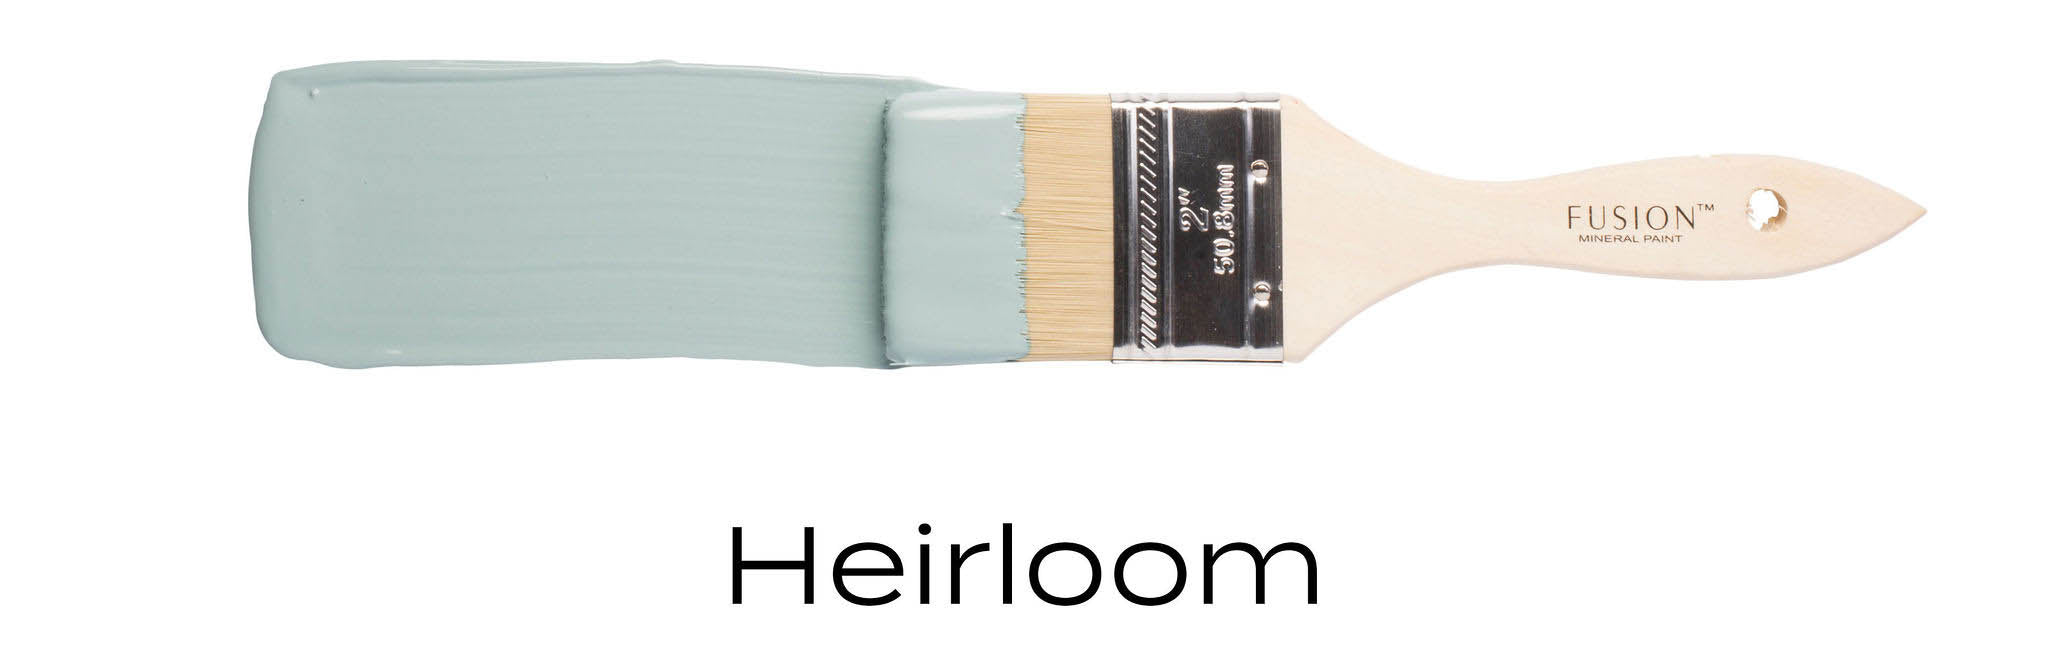 heirloom blue fusion mineral paint